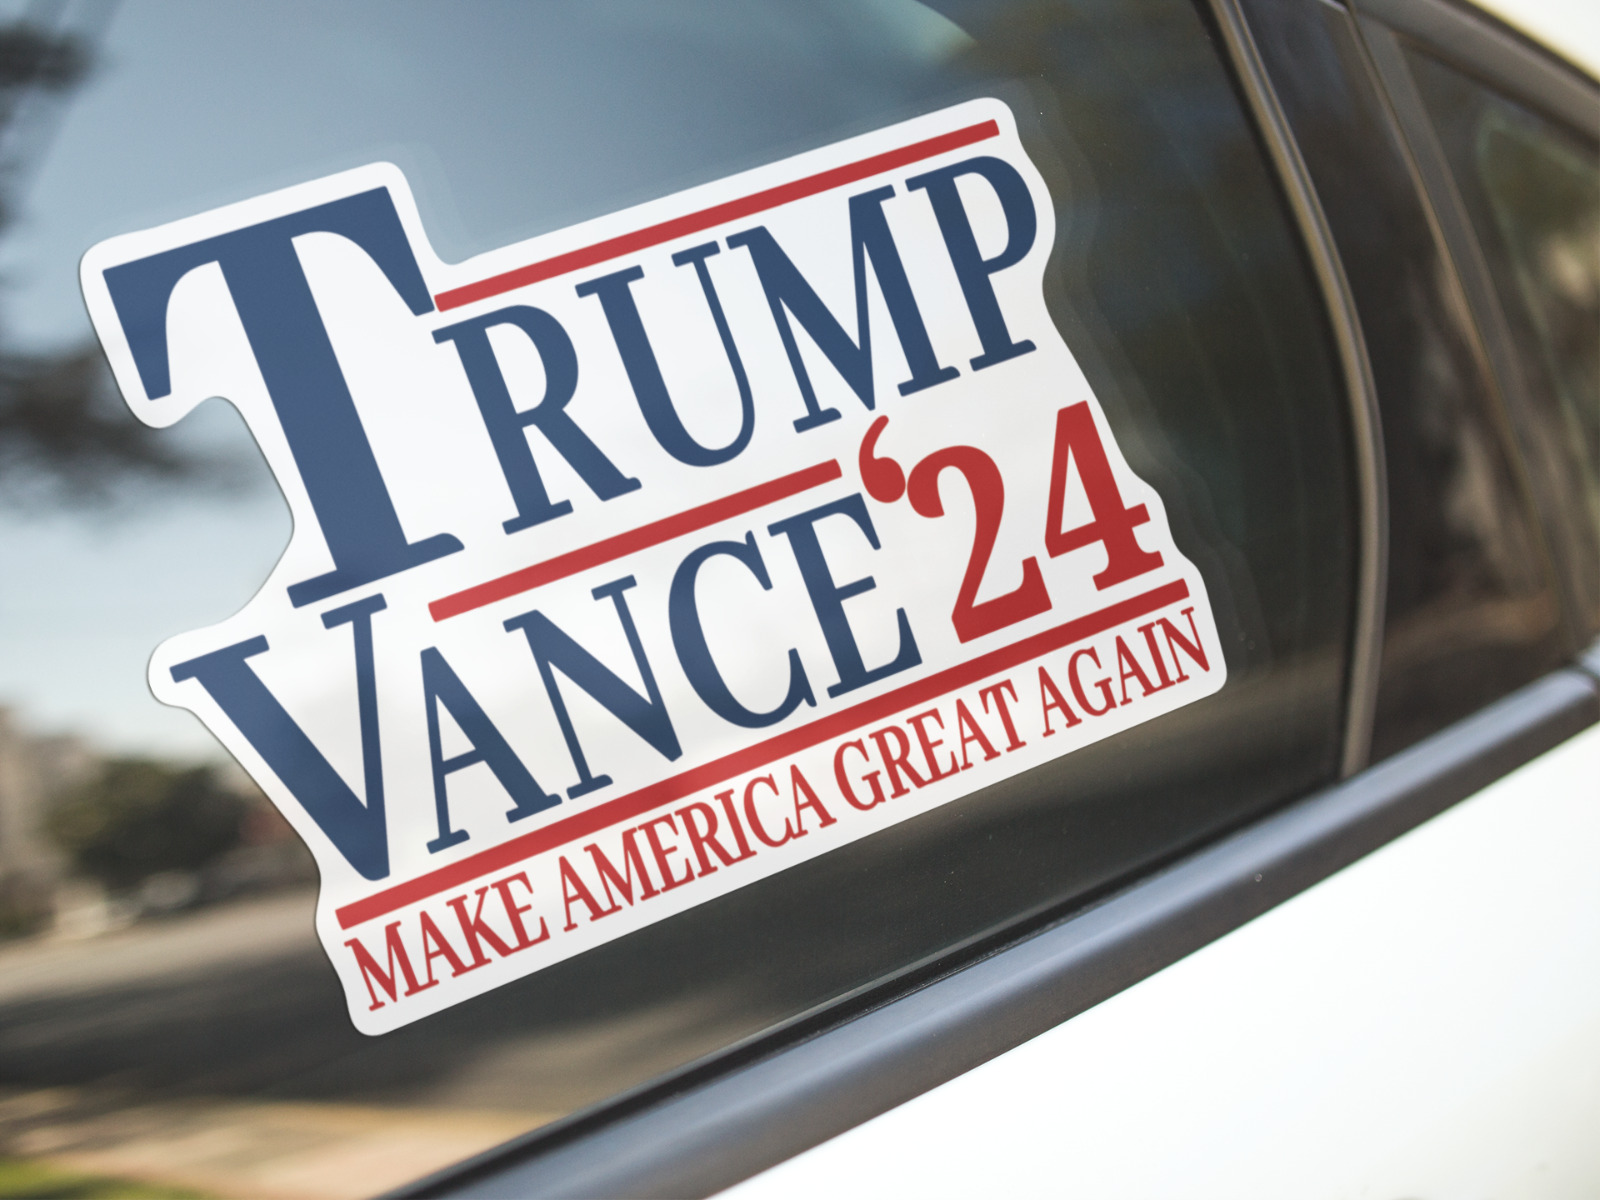 200 PACK TRUMP VANCE 2024 STICKER 5.5-INCH BY 3.4-IN MAGA AMERICA PRESIDENT USA